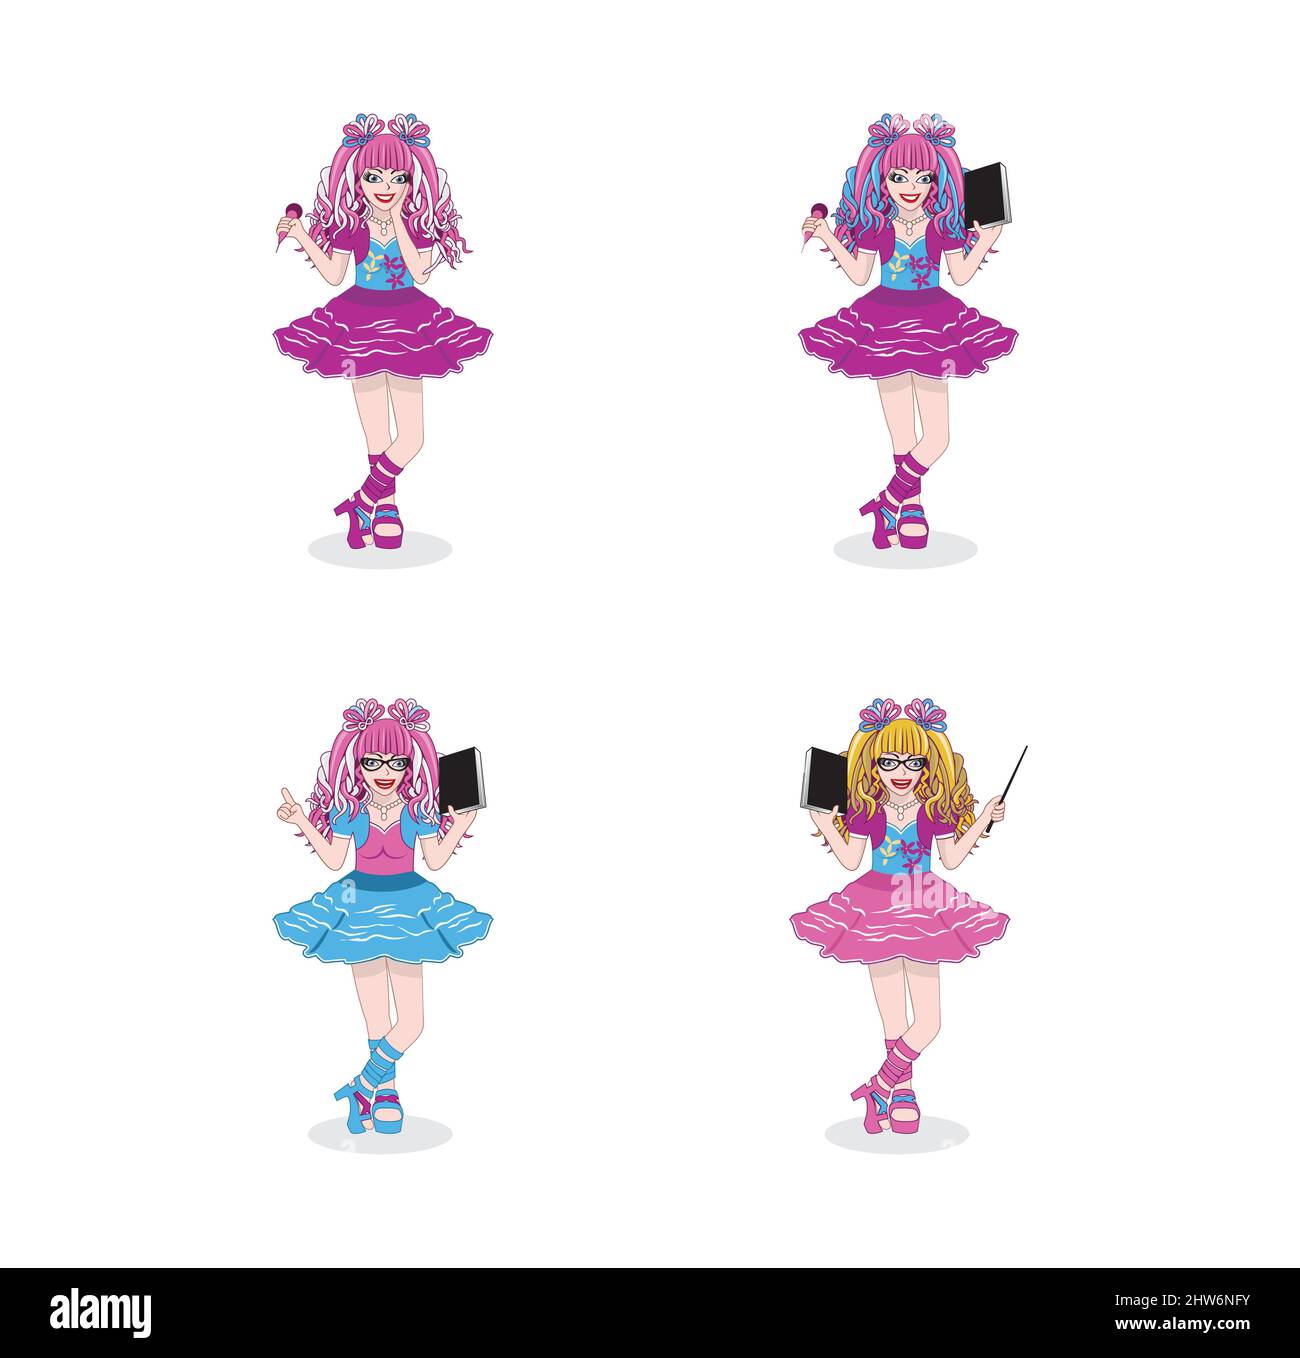 Roblox Girl Seamless Pattern for your Gamer Girl. Roblox 